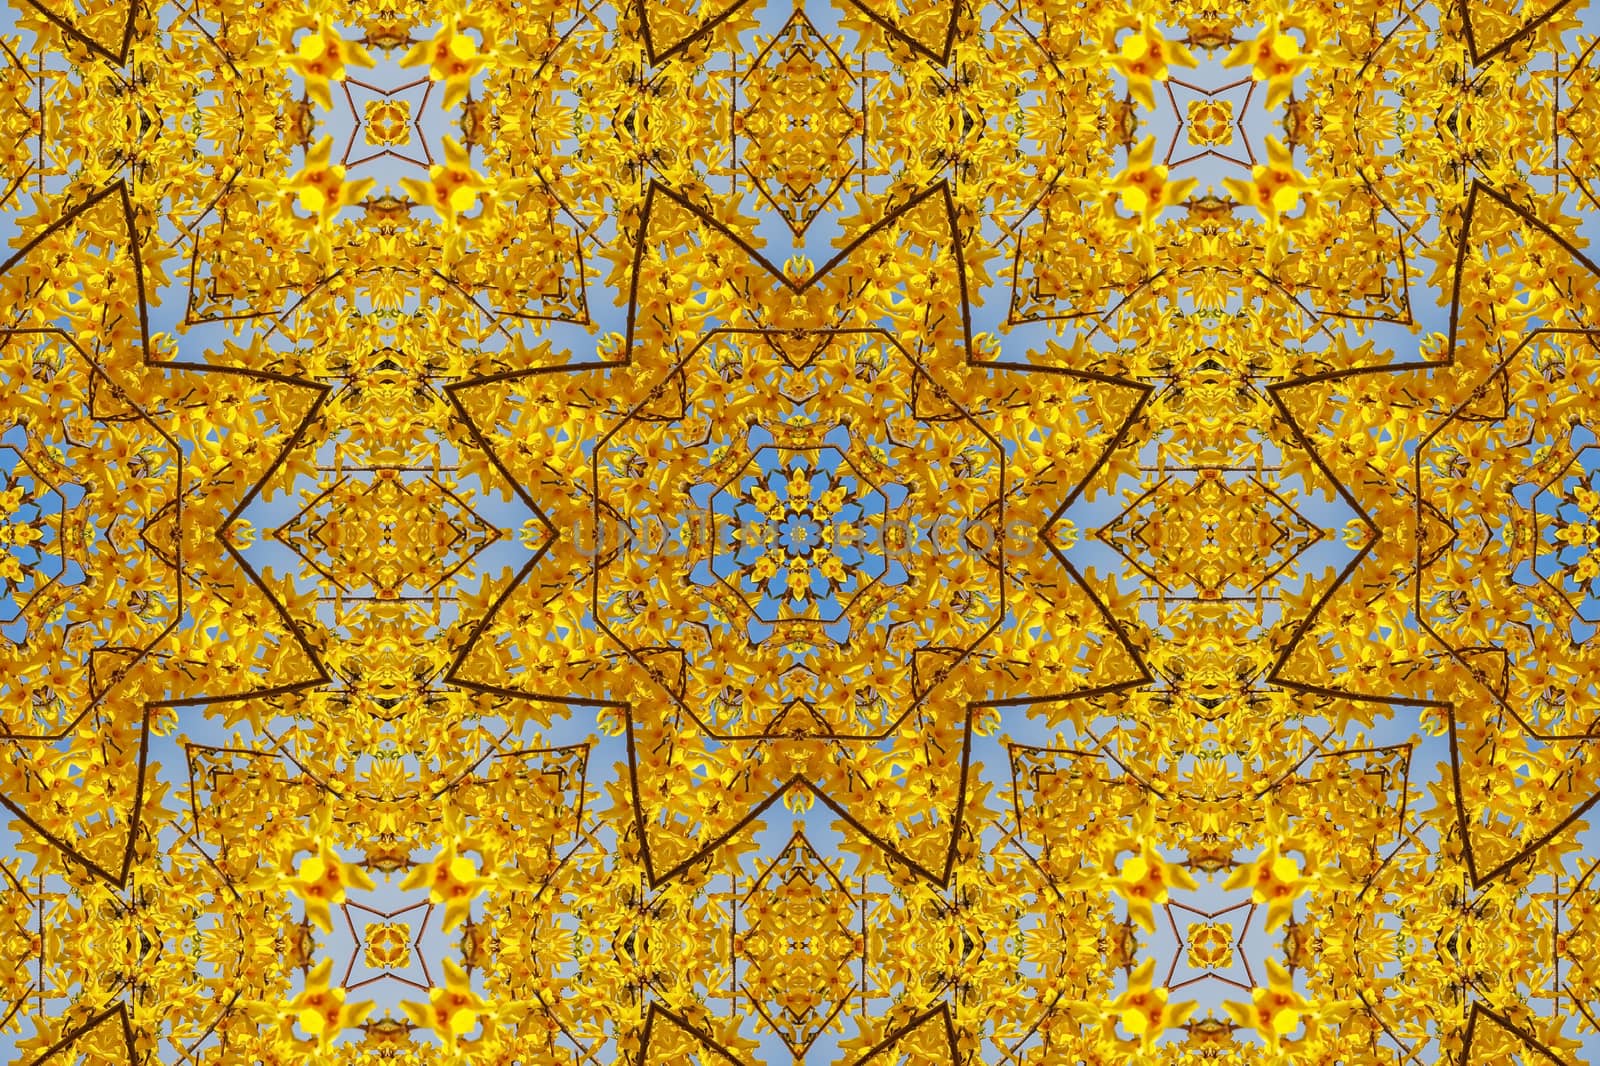 kaleidoscopic floral pattern by ires007